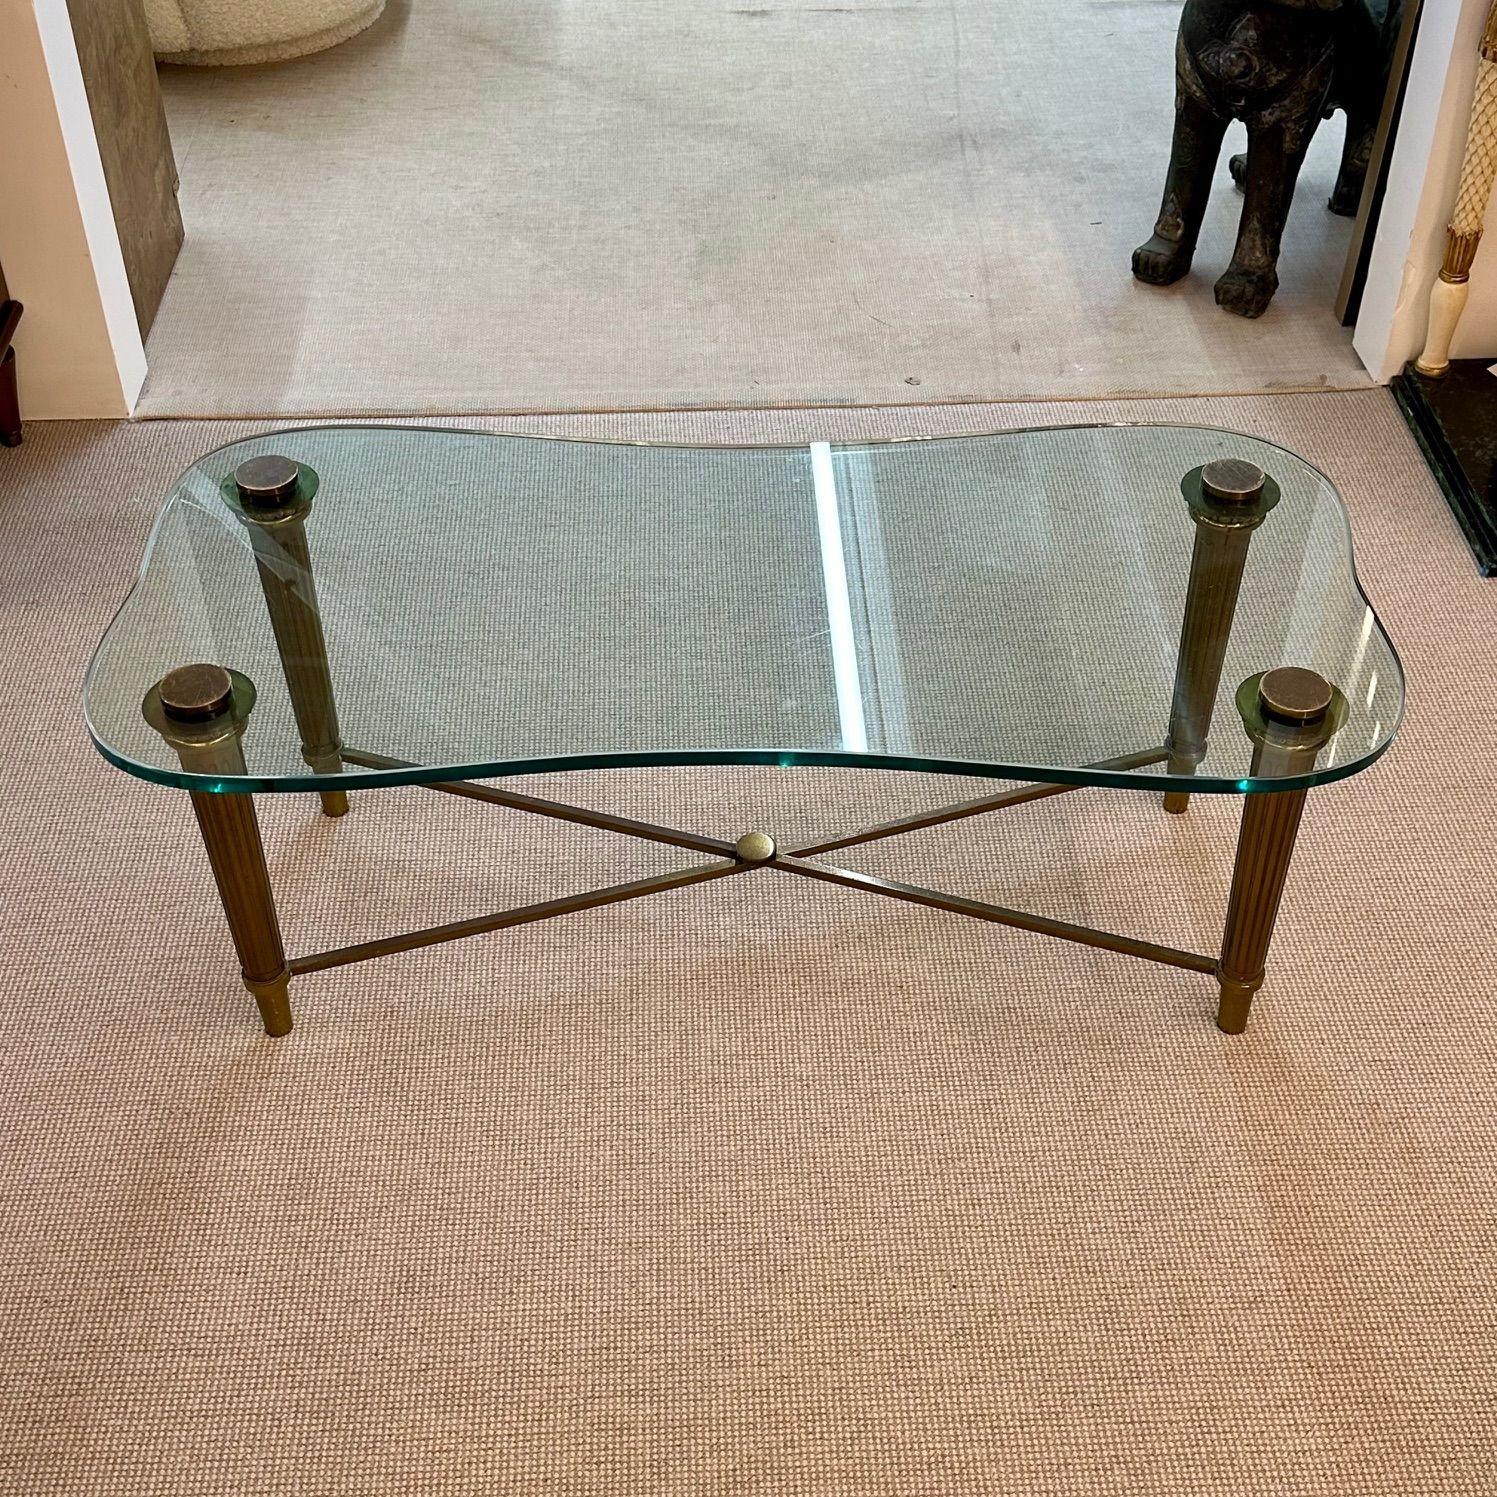 Hollywood Regency French Neo-Classical Glass Top Coffee Table, Mid-Century Modern PE Guerin Style For Sale